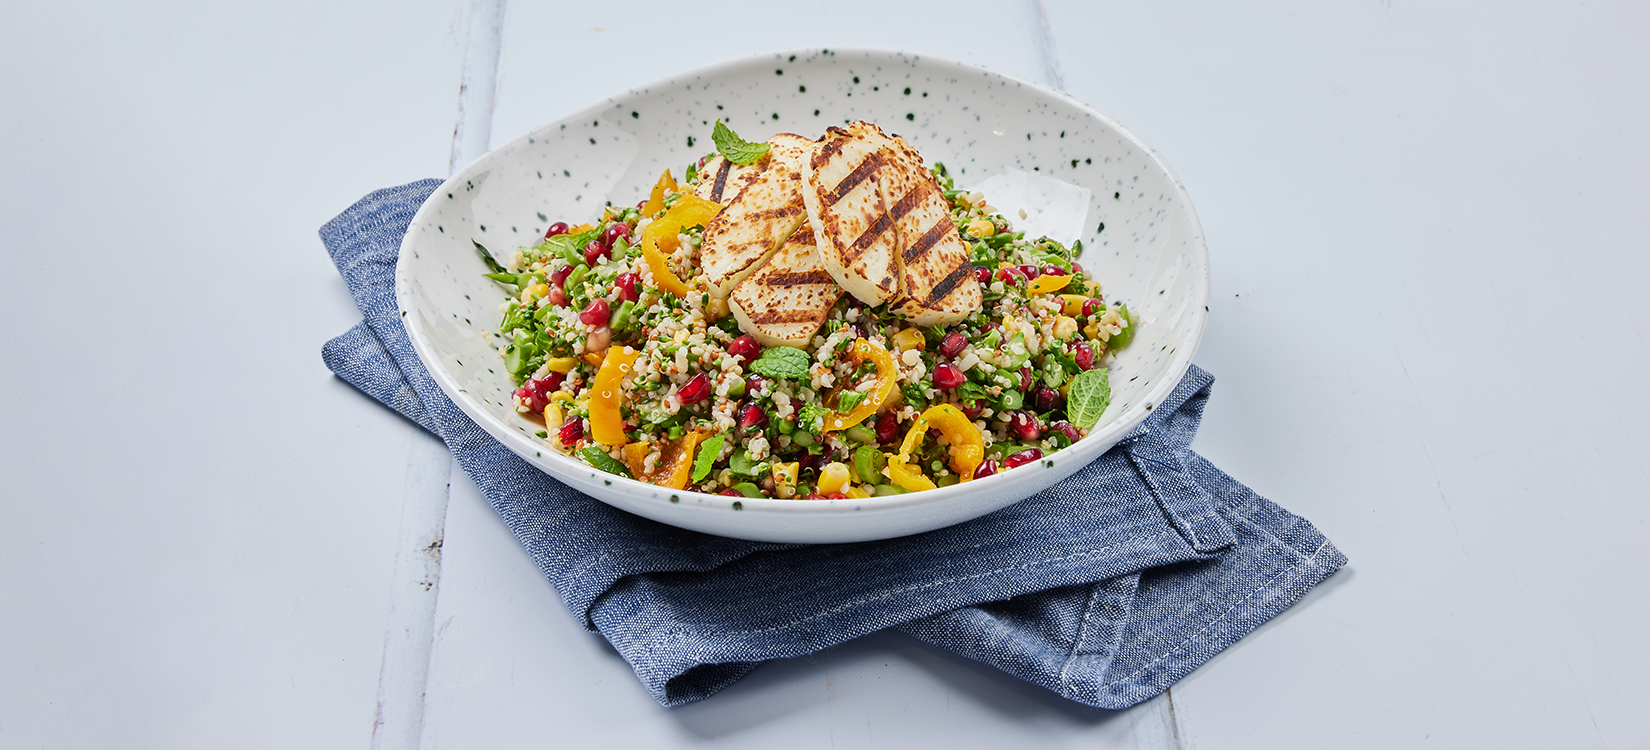 Zesty Tabbouleh with Halloumi & Pomegranate